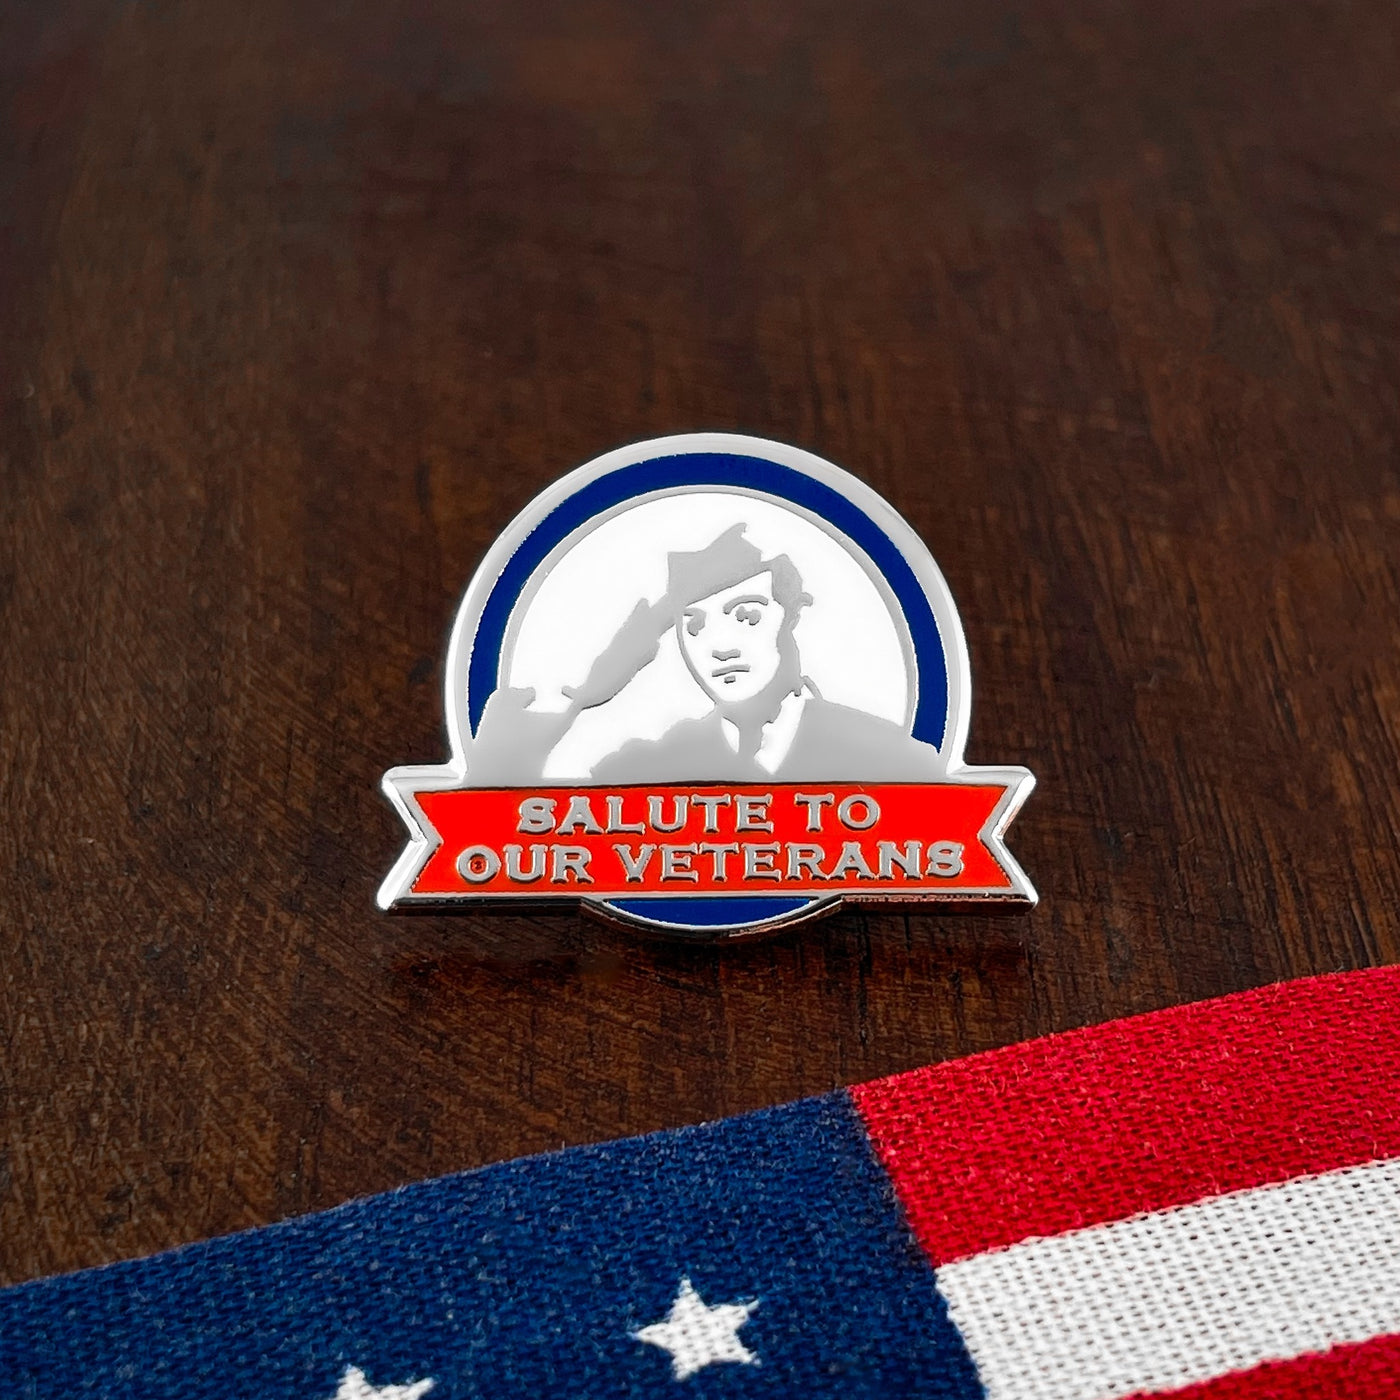 Silver Salute to our Veterans Pin